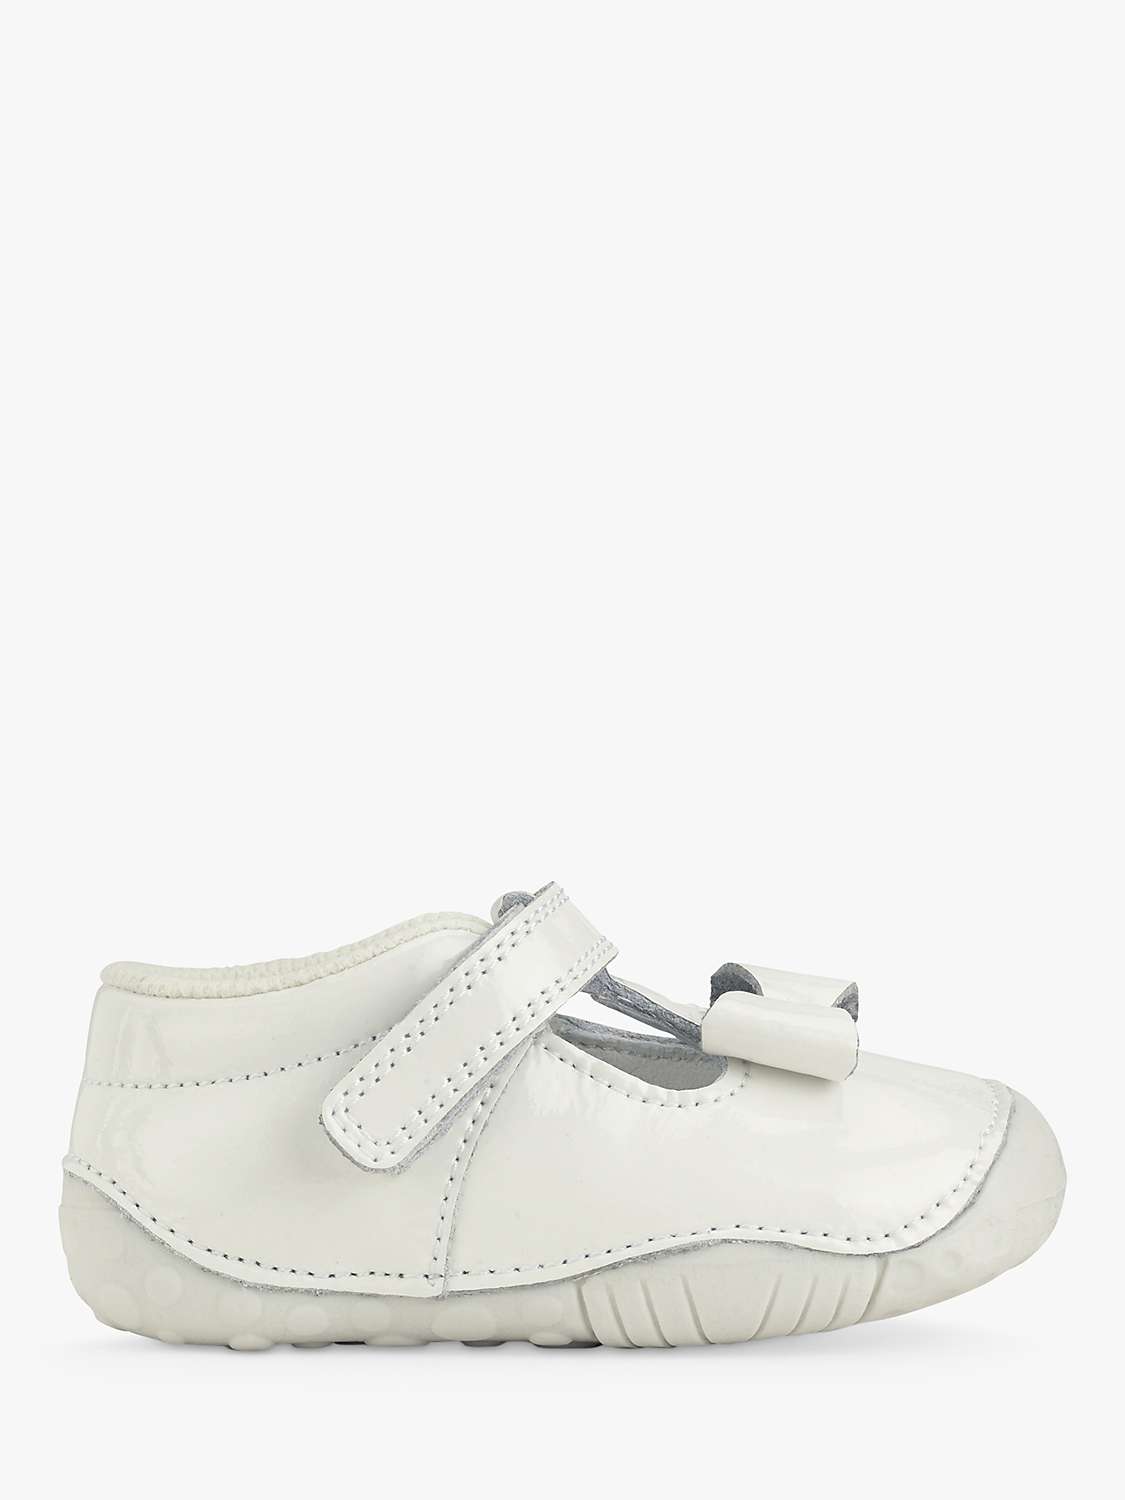 Buy Start-Rite Baby Wiggle Patent Pre-Walker Shoes, White Online at johnlewis.com